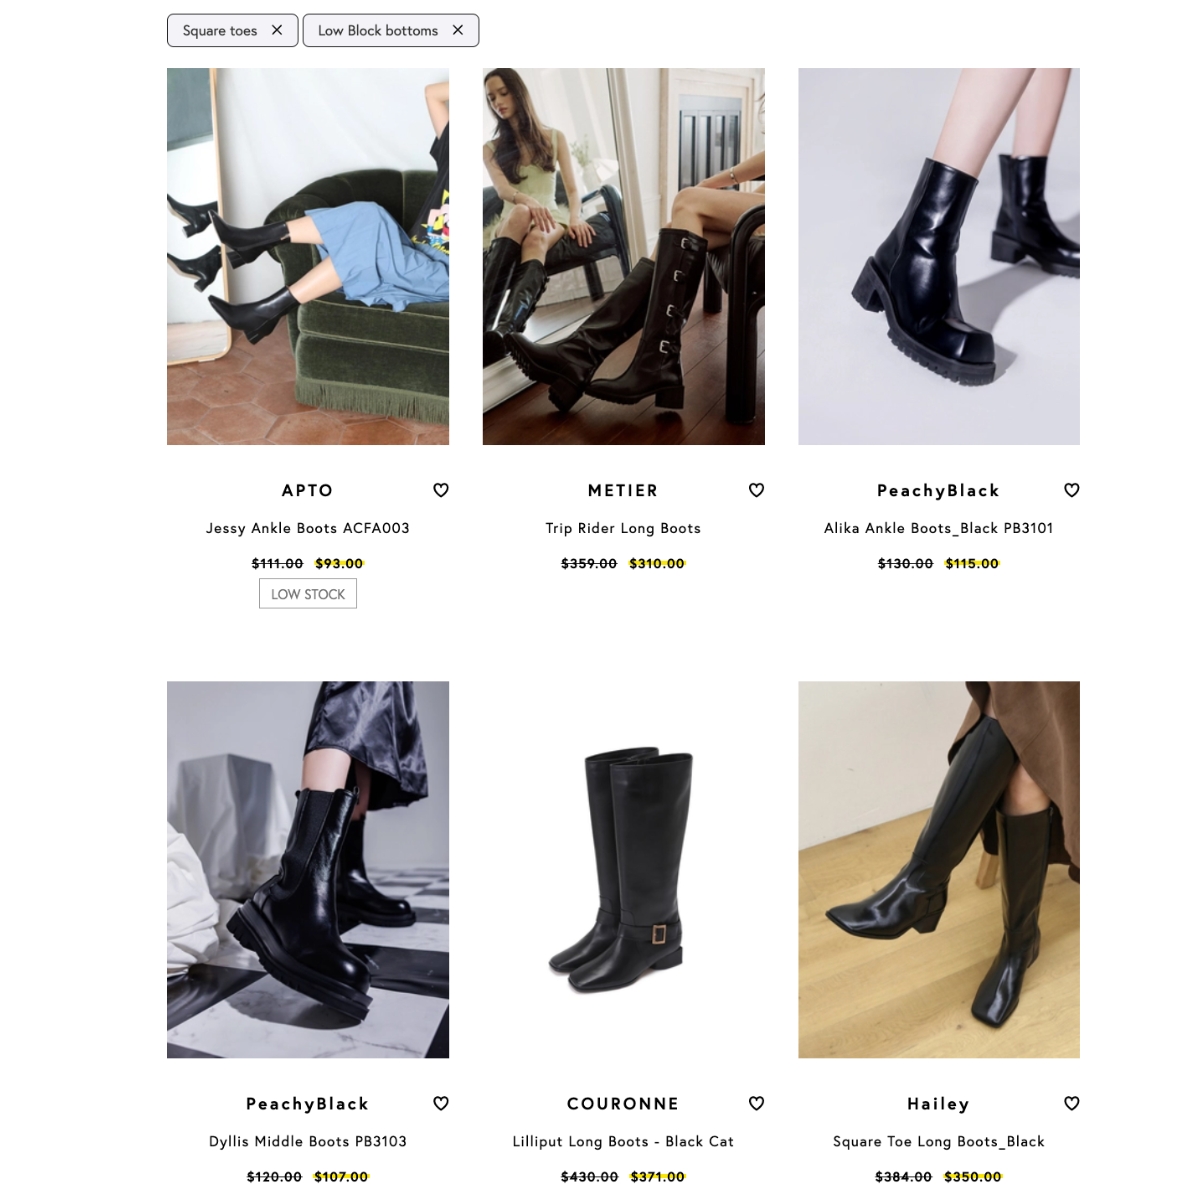 Low block heel square toe boot search results that use fashion image tagging